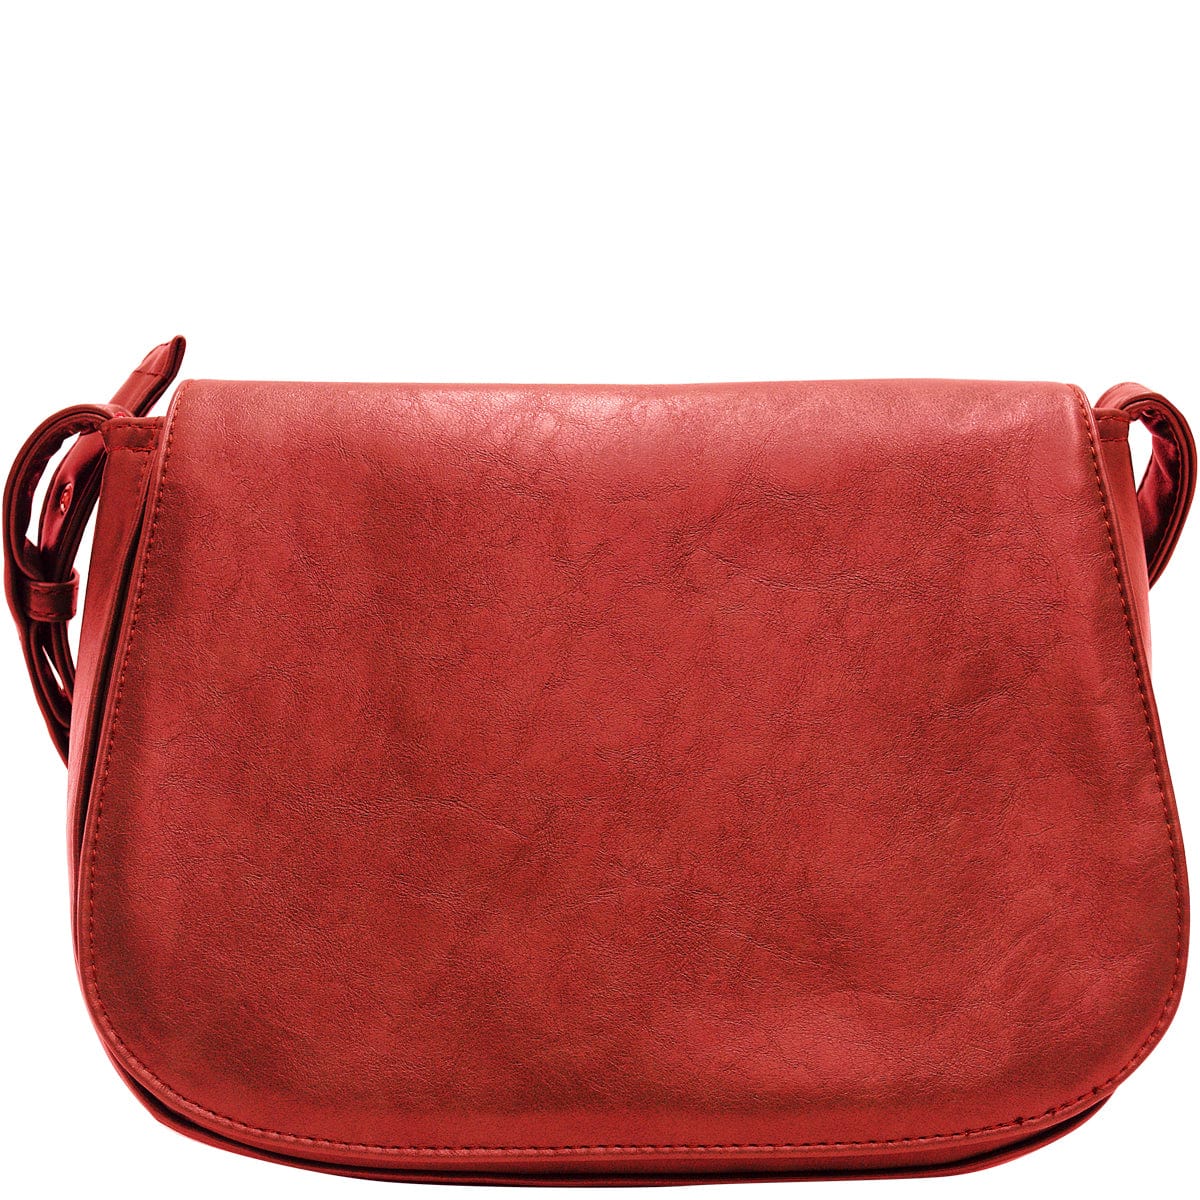 Little Beth Bag - Red Leather Look